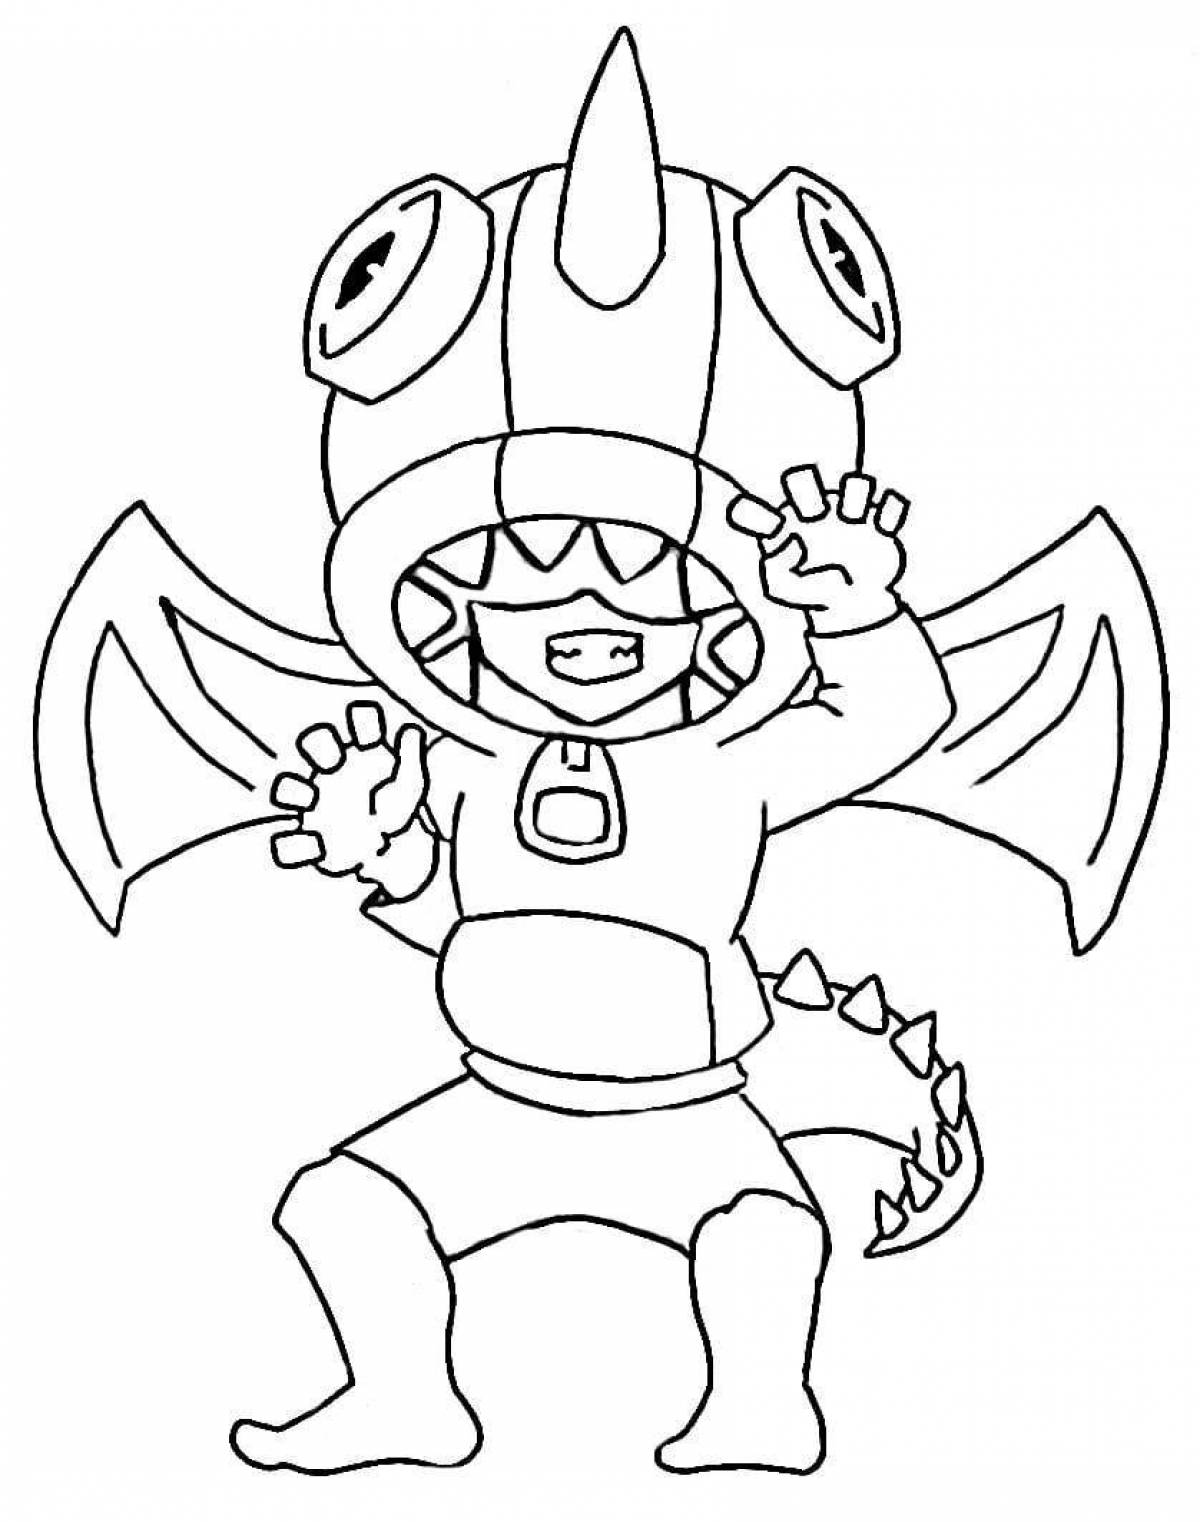 Coloring page cheerful leon